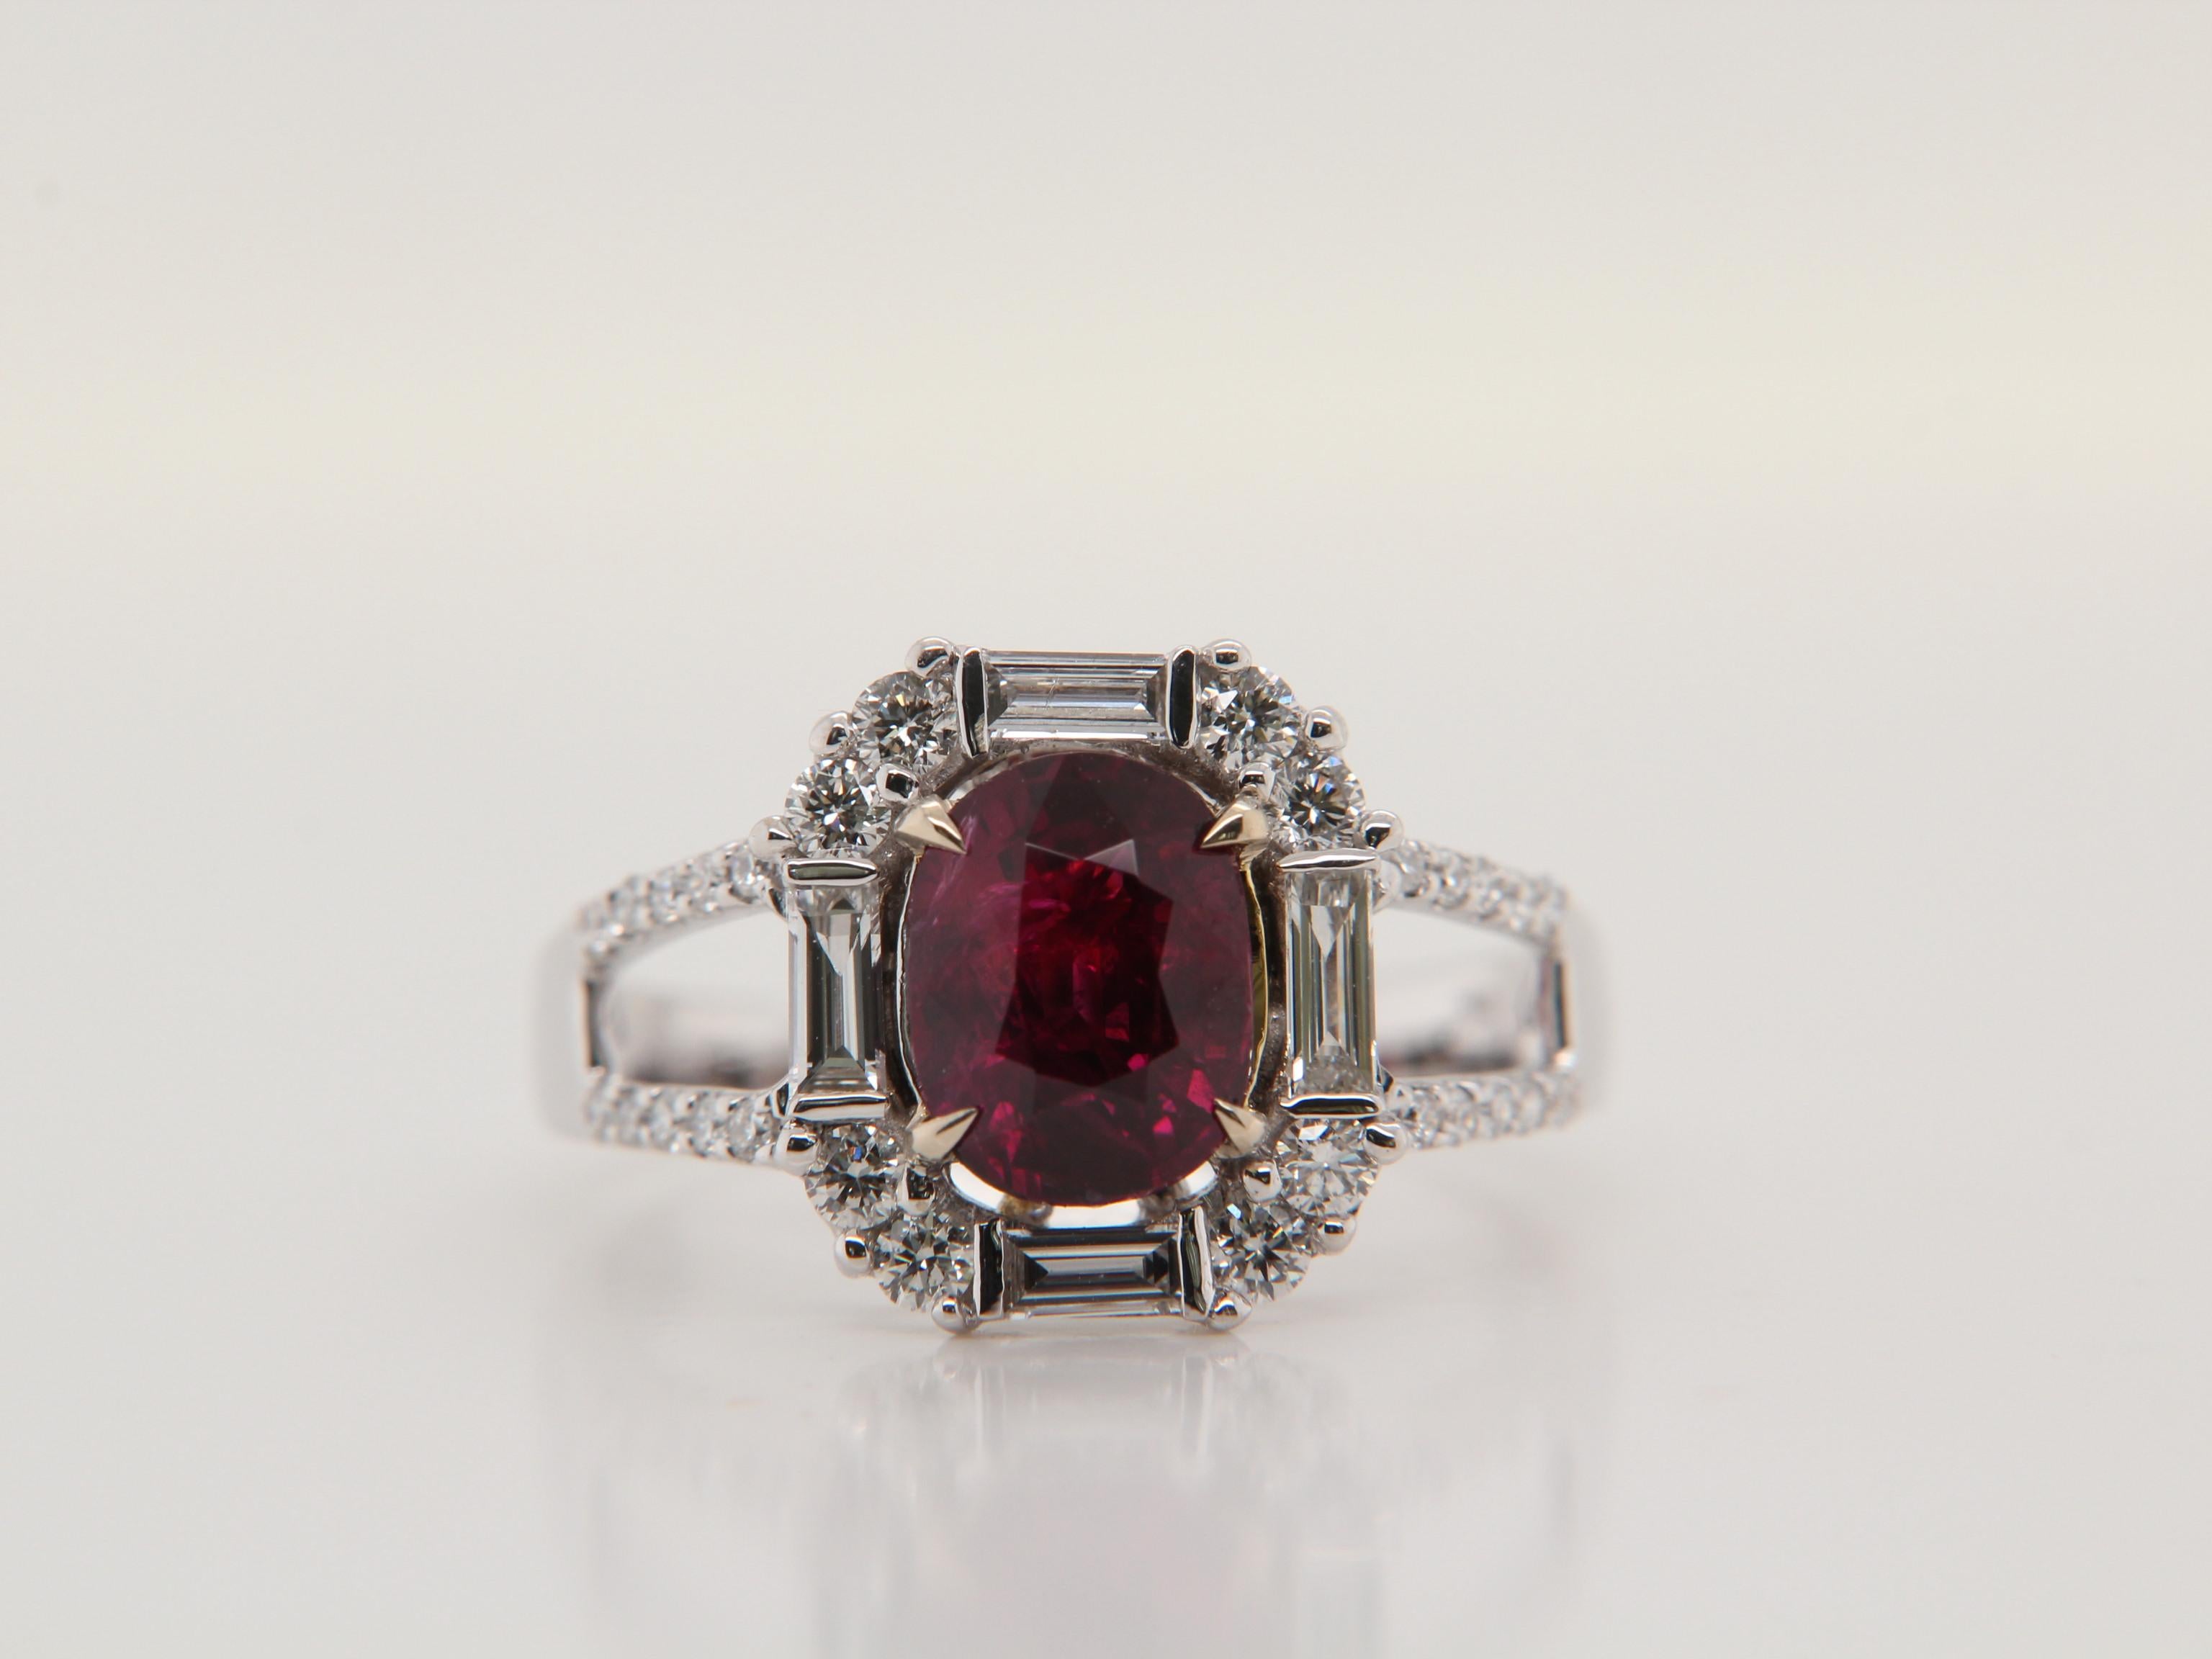 A brand new Burmese ruby and diamond ring by Rewa Jewelry. The mounting is handmade in 18 Karat white gold and set with a 1.63 Carat ruby in the center. The ruby is certified by Gem Research Swisslab as natural, 'Red', and without any heat